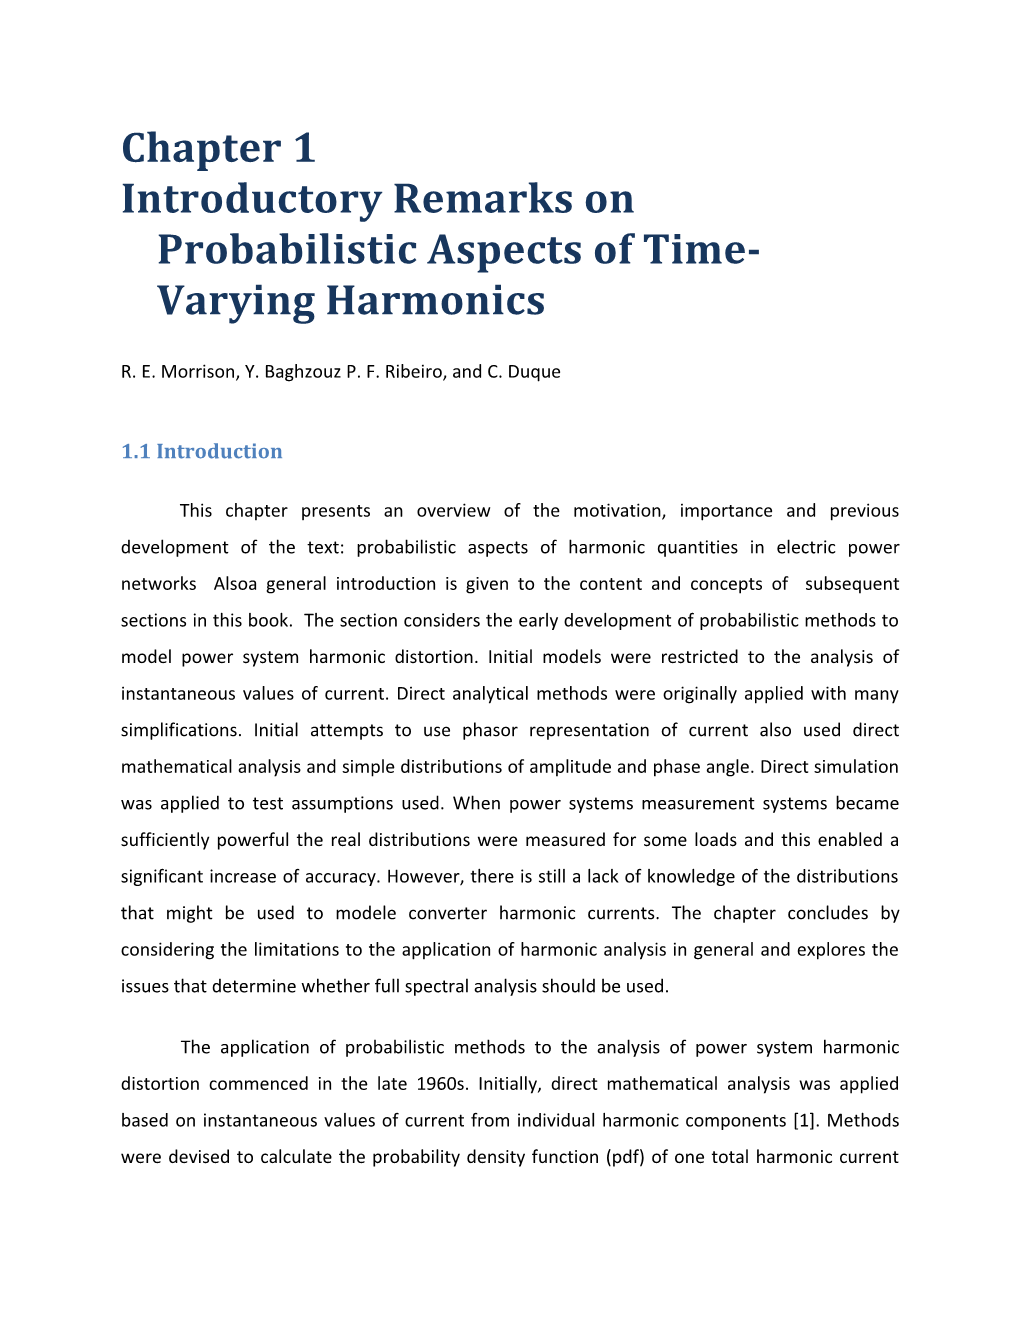 Introductory Remarks on Probabilistic Aspects of Time-Varying Harmonics